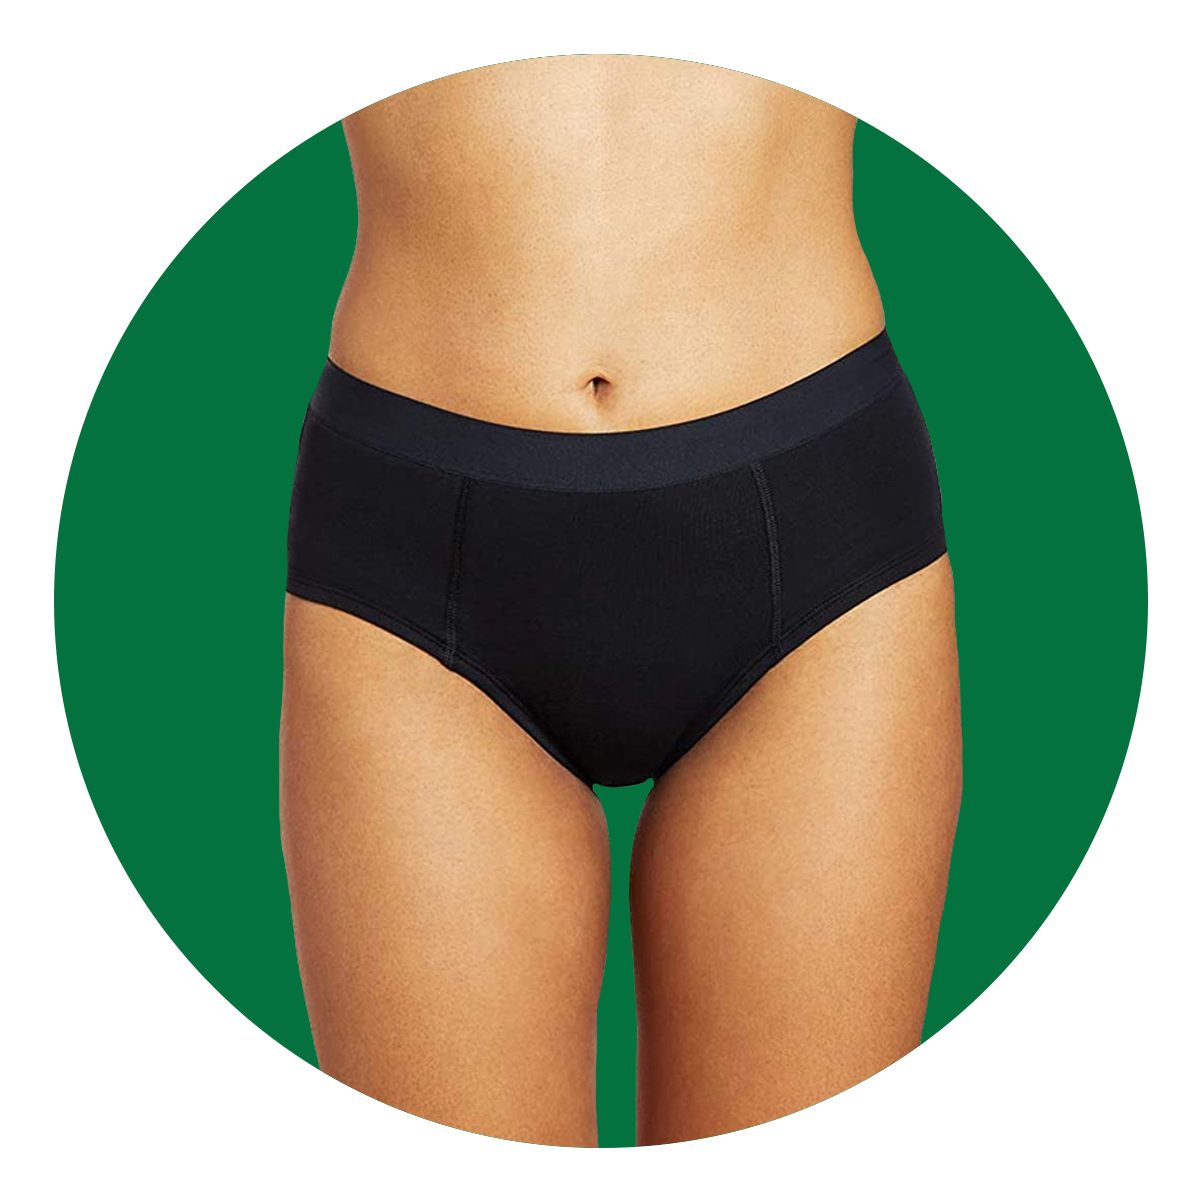 What is the Healthiest Underwear Fabric? Learn More About Apele Panties